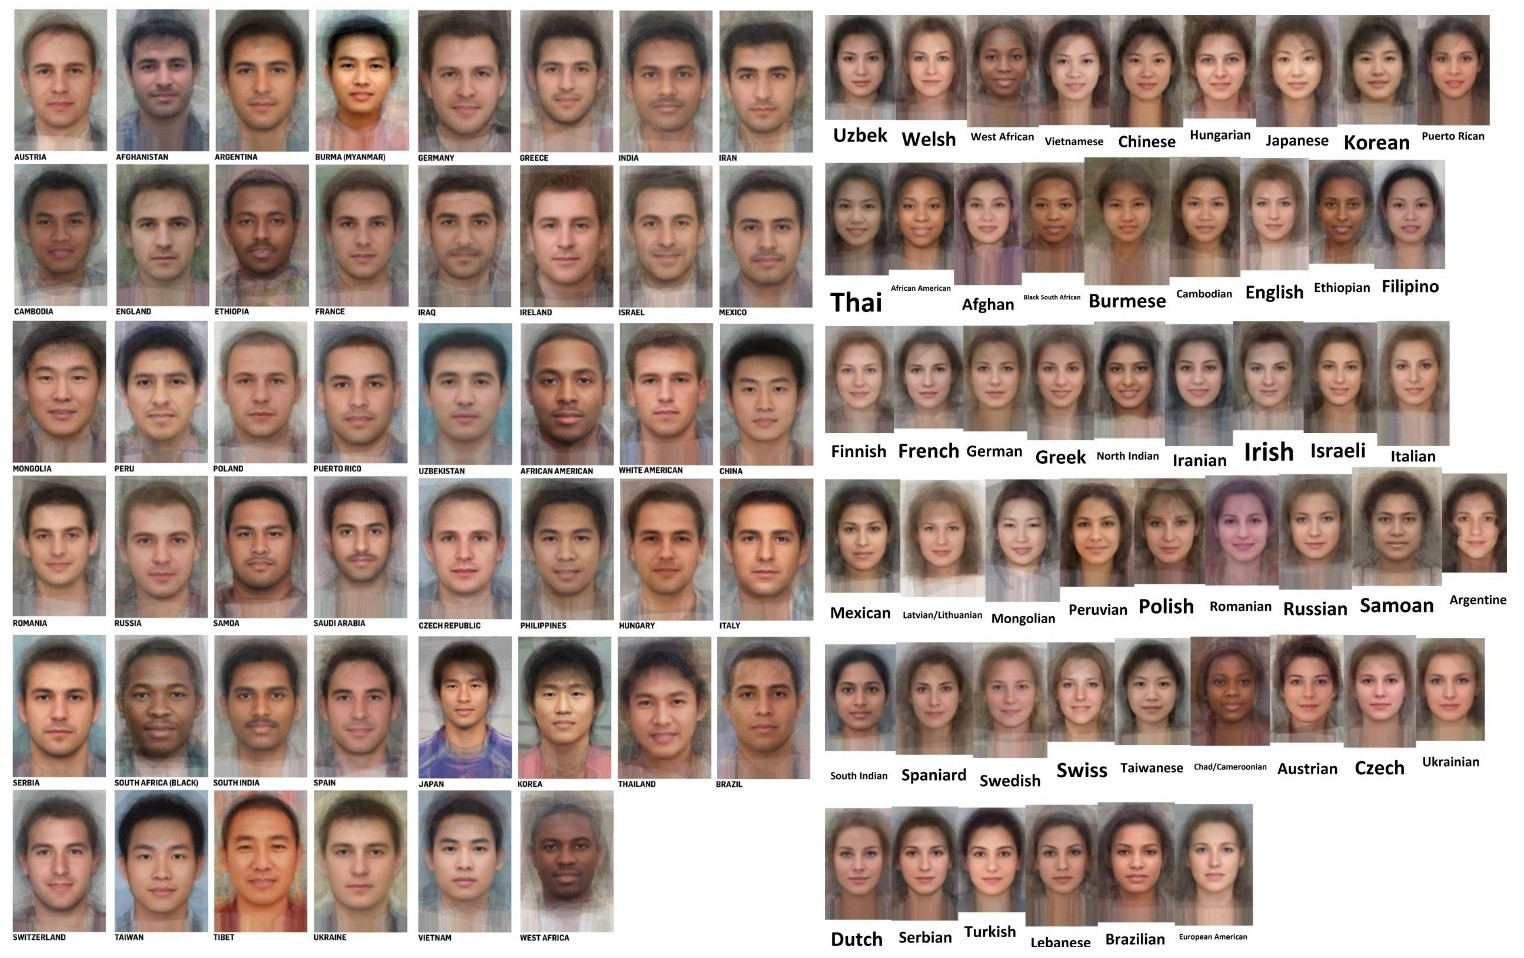 After laying portraits on top of eachother, scientists determined the average face per country